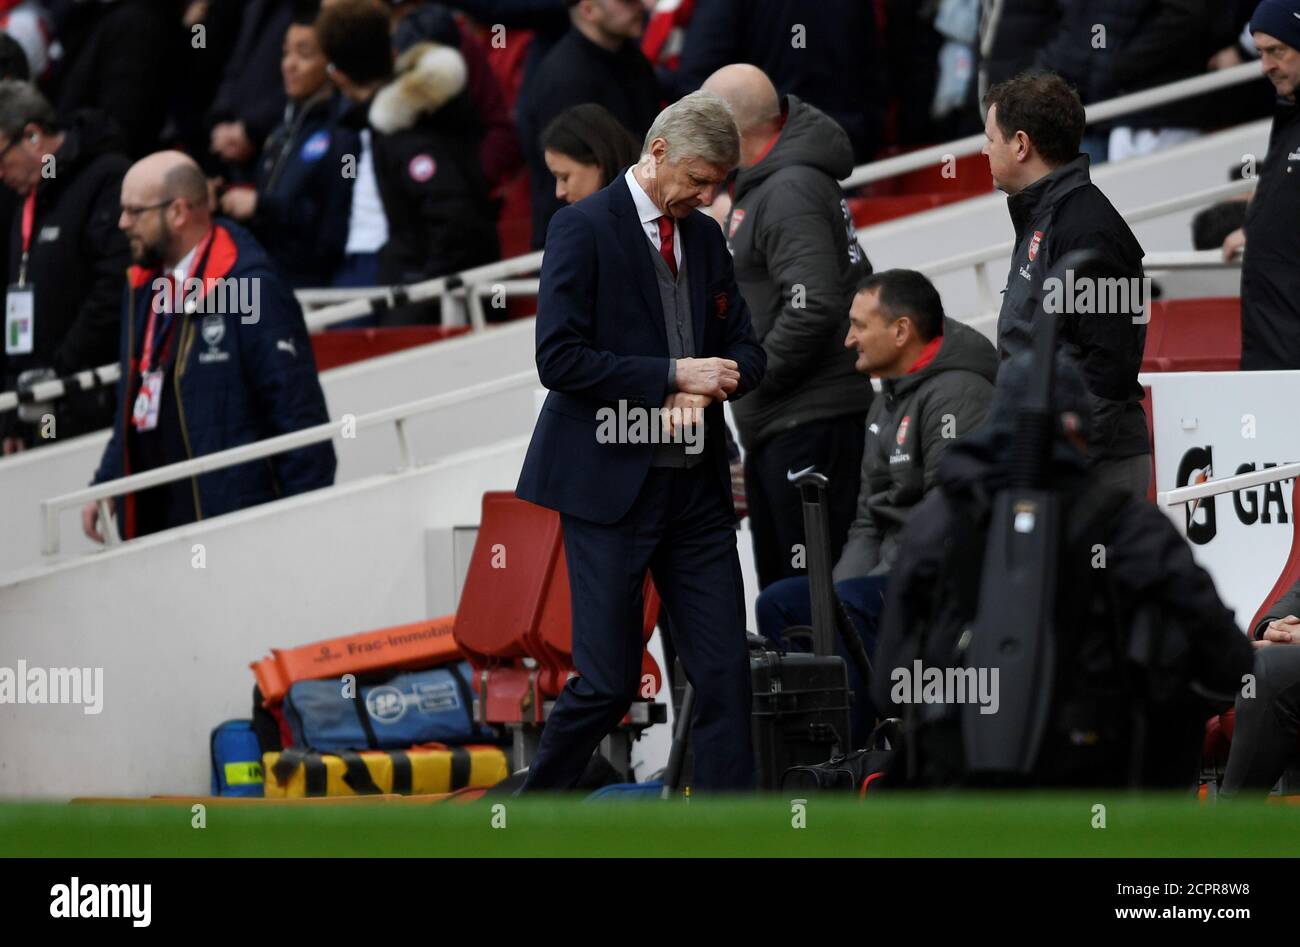 Soccer Football - Premier League - Arsenal vs Watford - Emirates Stadium, London, Britain - March 11, 2018   Arsenal manager Arsene Wenger before the match    Action Images via Reuters/Tony O'Brien    EDITORIAL USE ONLY. No use with unauthorized audio, video, data, fixture lists, club/league logos or 'live' services. Online in-match use limited to 75 images, no video emulation. No use in betting, games or single club/league/player publications.  Please contact your account representative for further details. Stock Photo